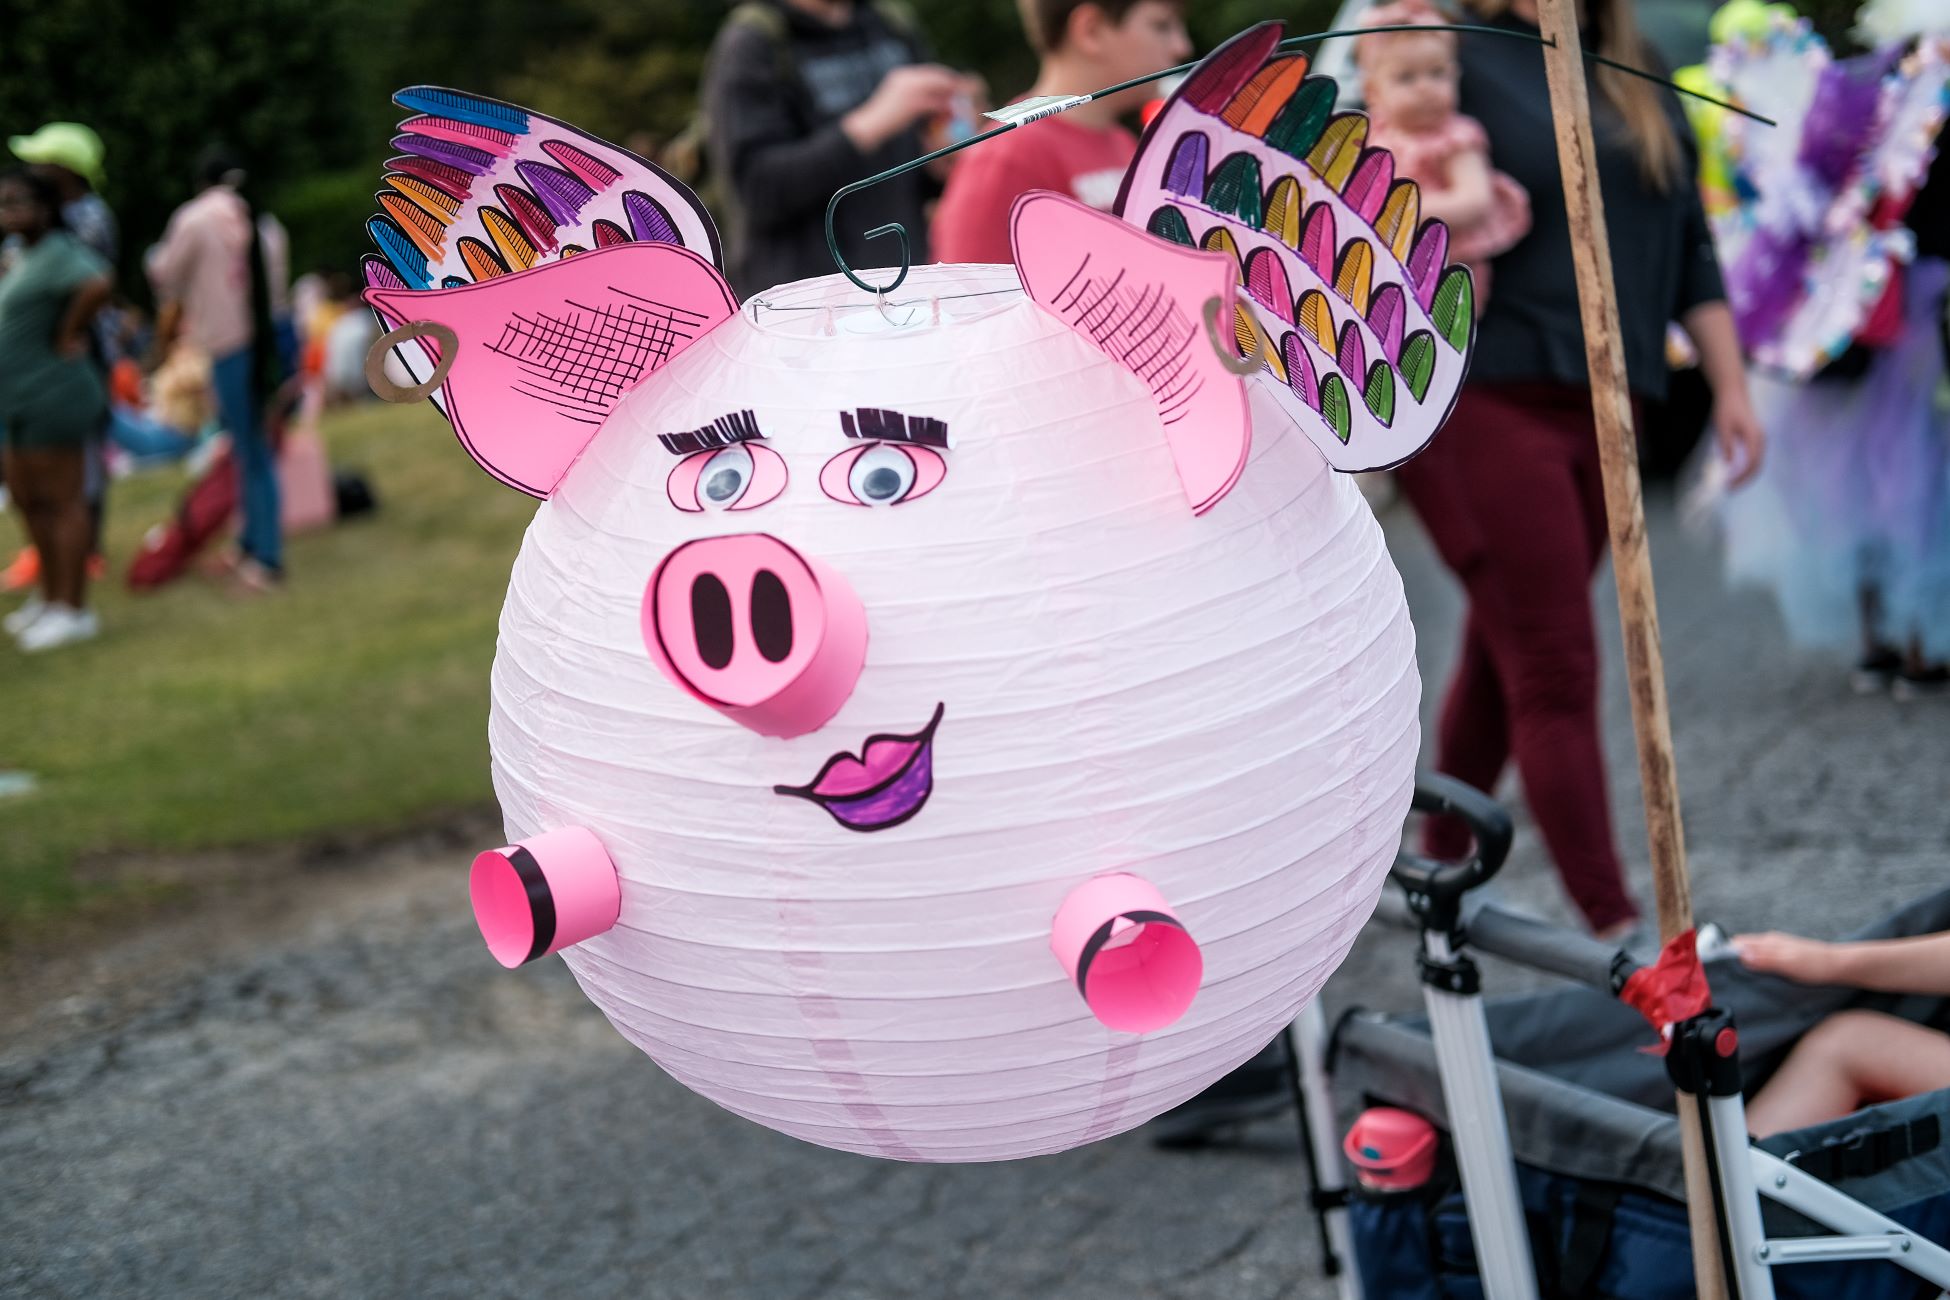 A finished Lantern-Making Kit, resembling a flying pig 